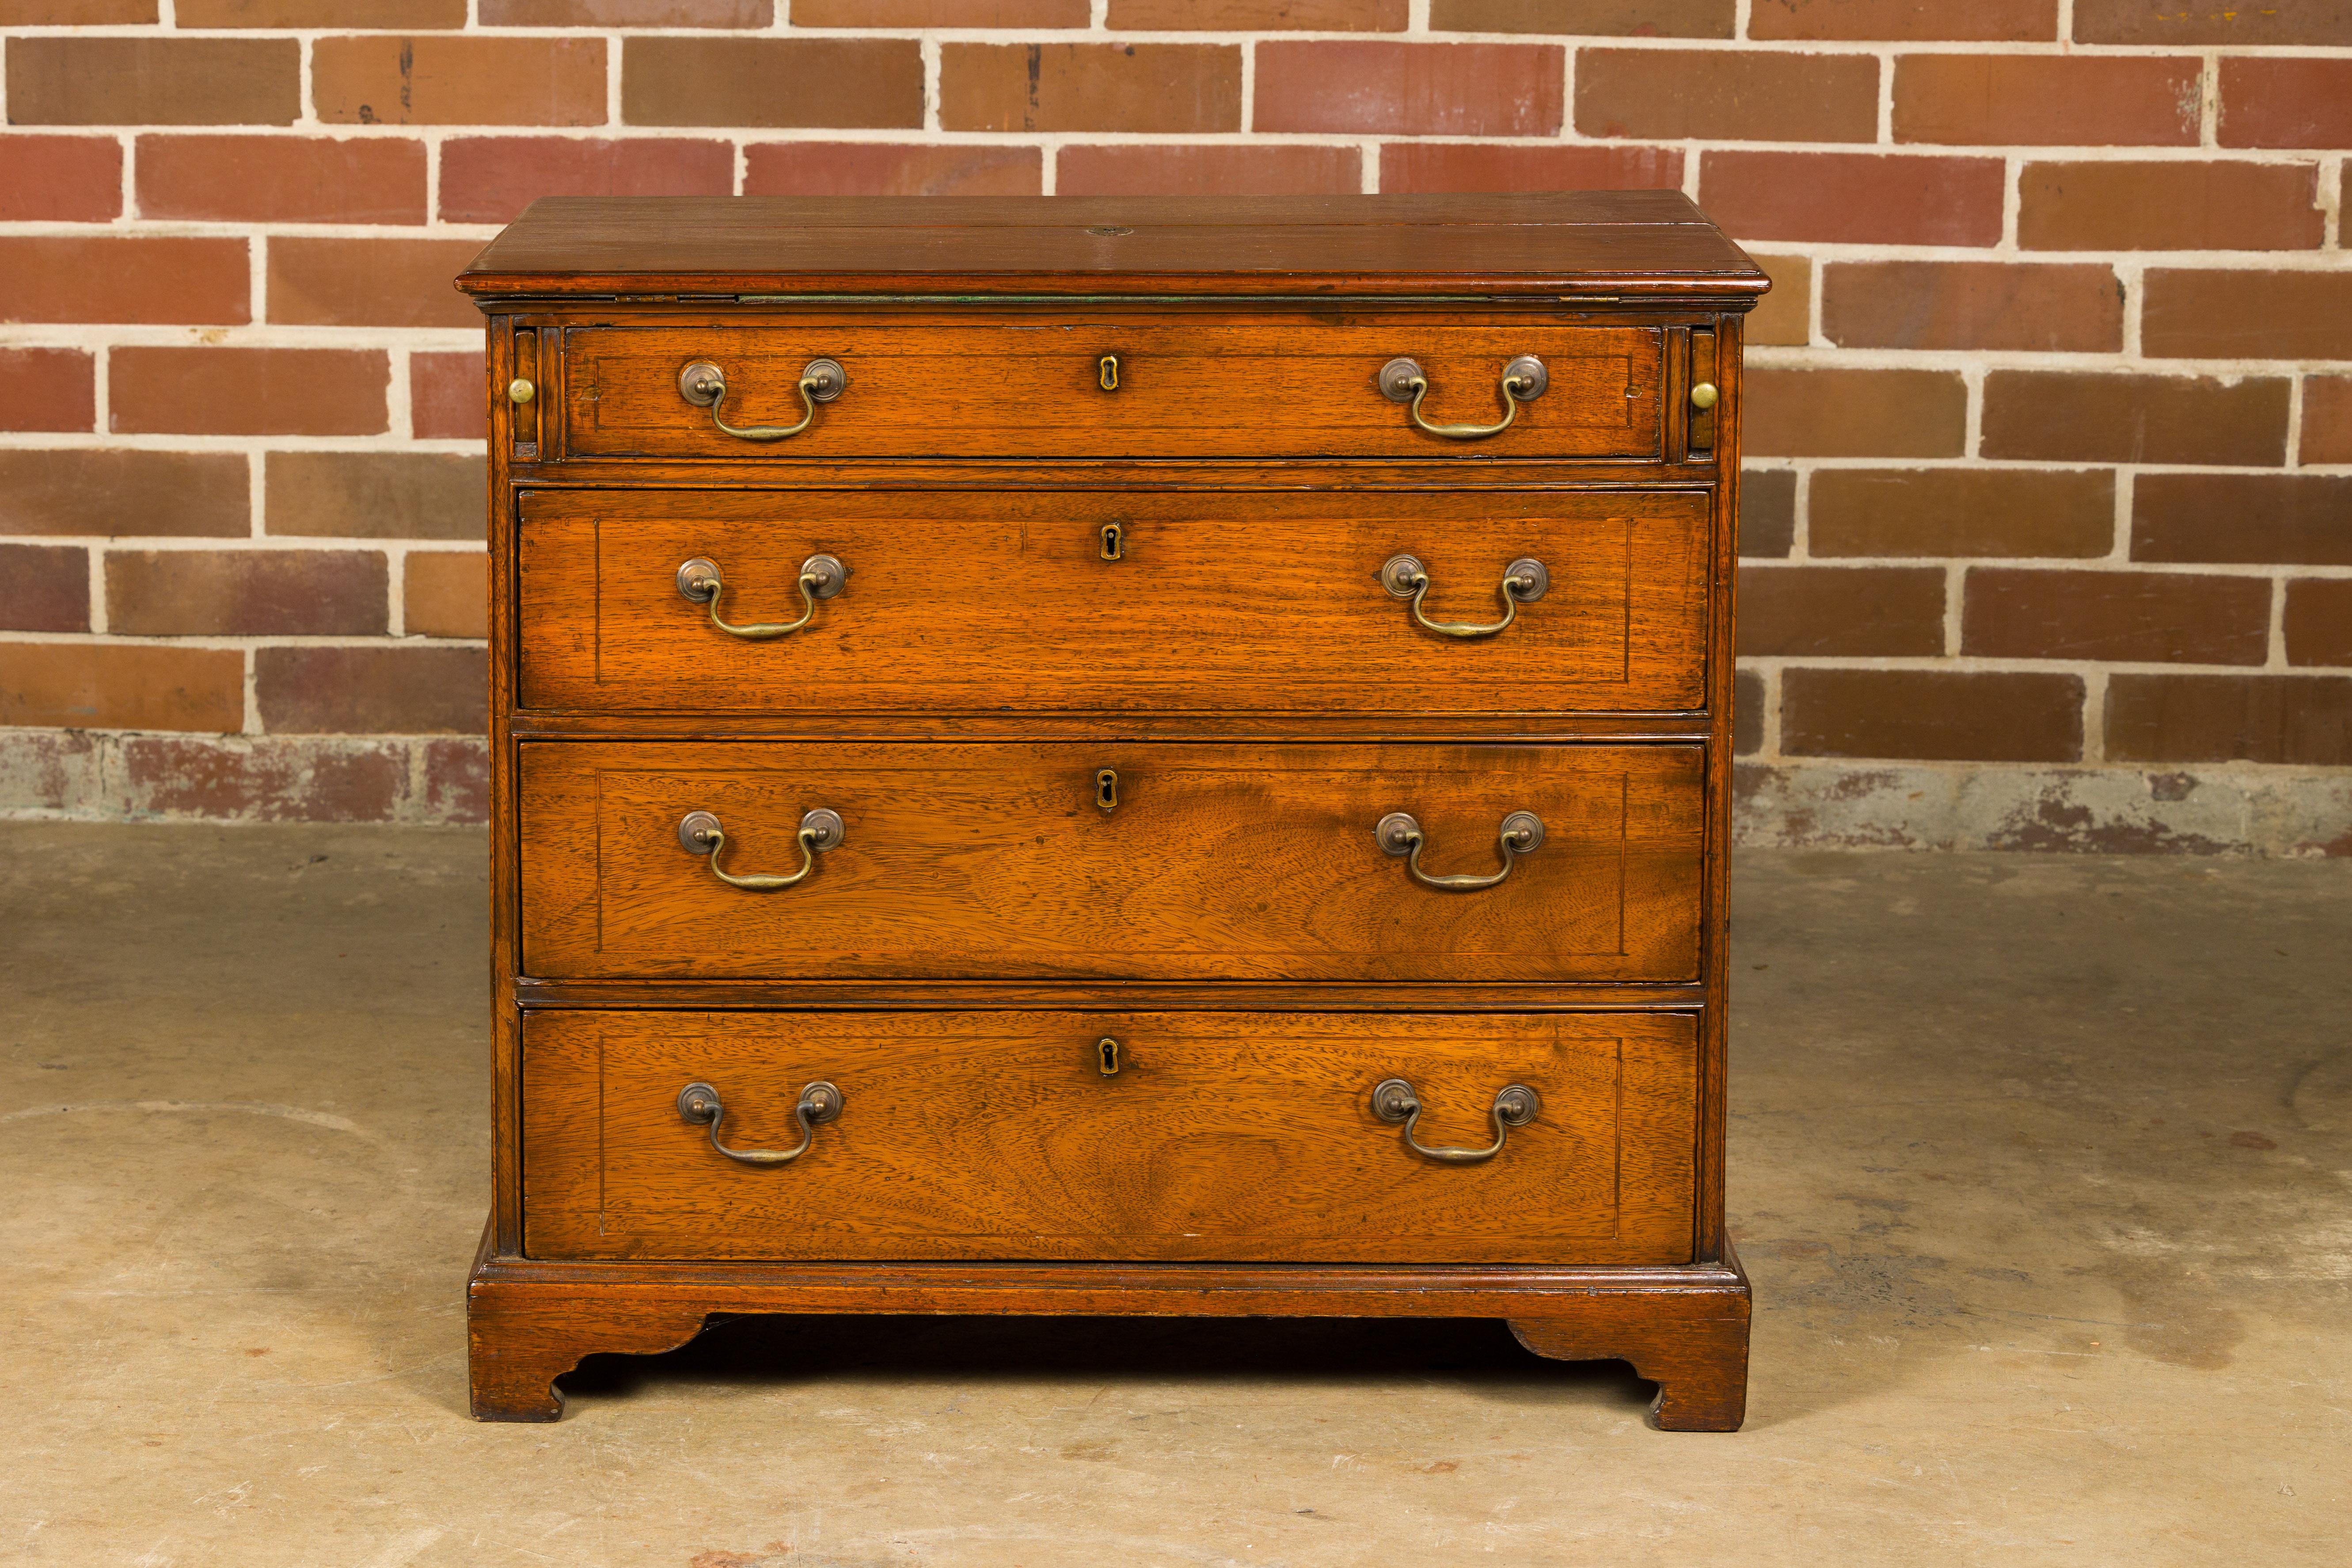 An English walnut Campaign butler's desk from the 19th century with writing area, three drawers, bracket feet and brass hardware. This 19th-century English walnut Campaign butler's desk is a remarkable fusion of functionality and classic elegance.